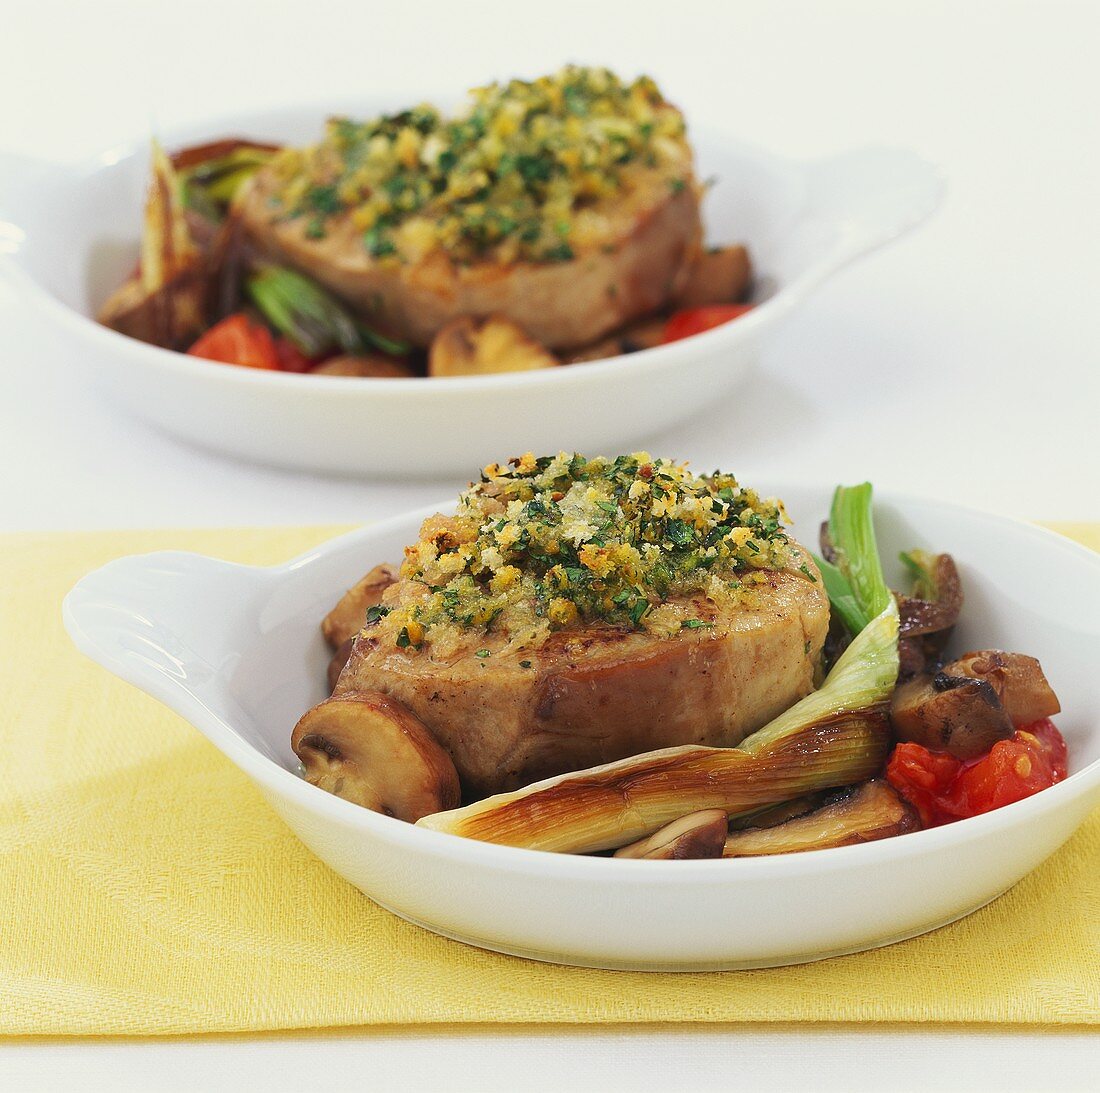 Medallions of veal with herb crust on vegetables